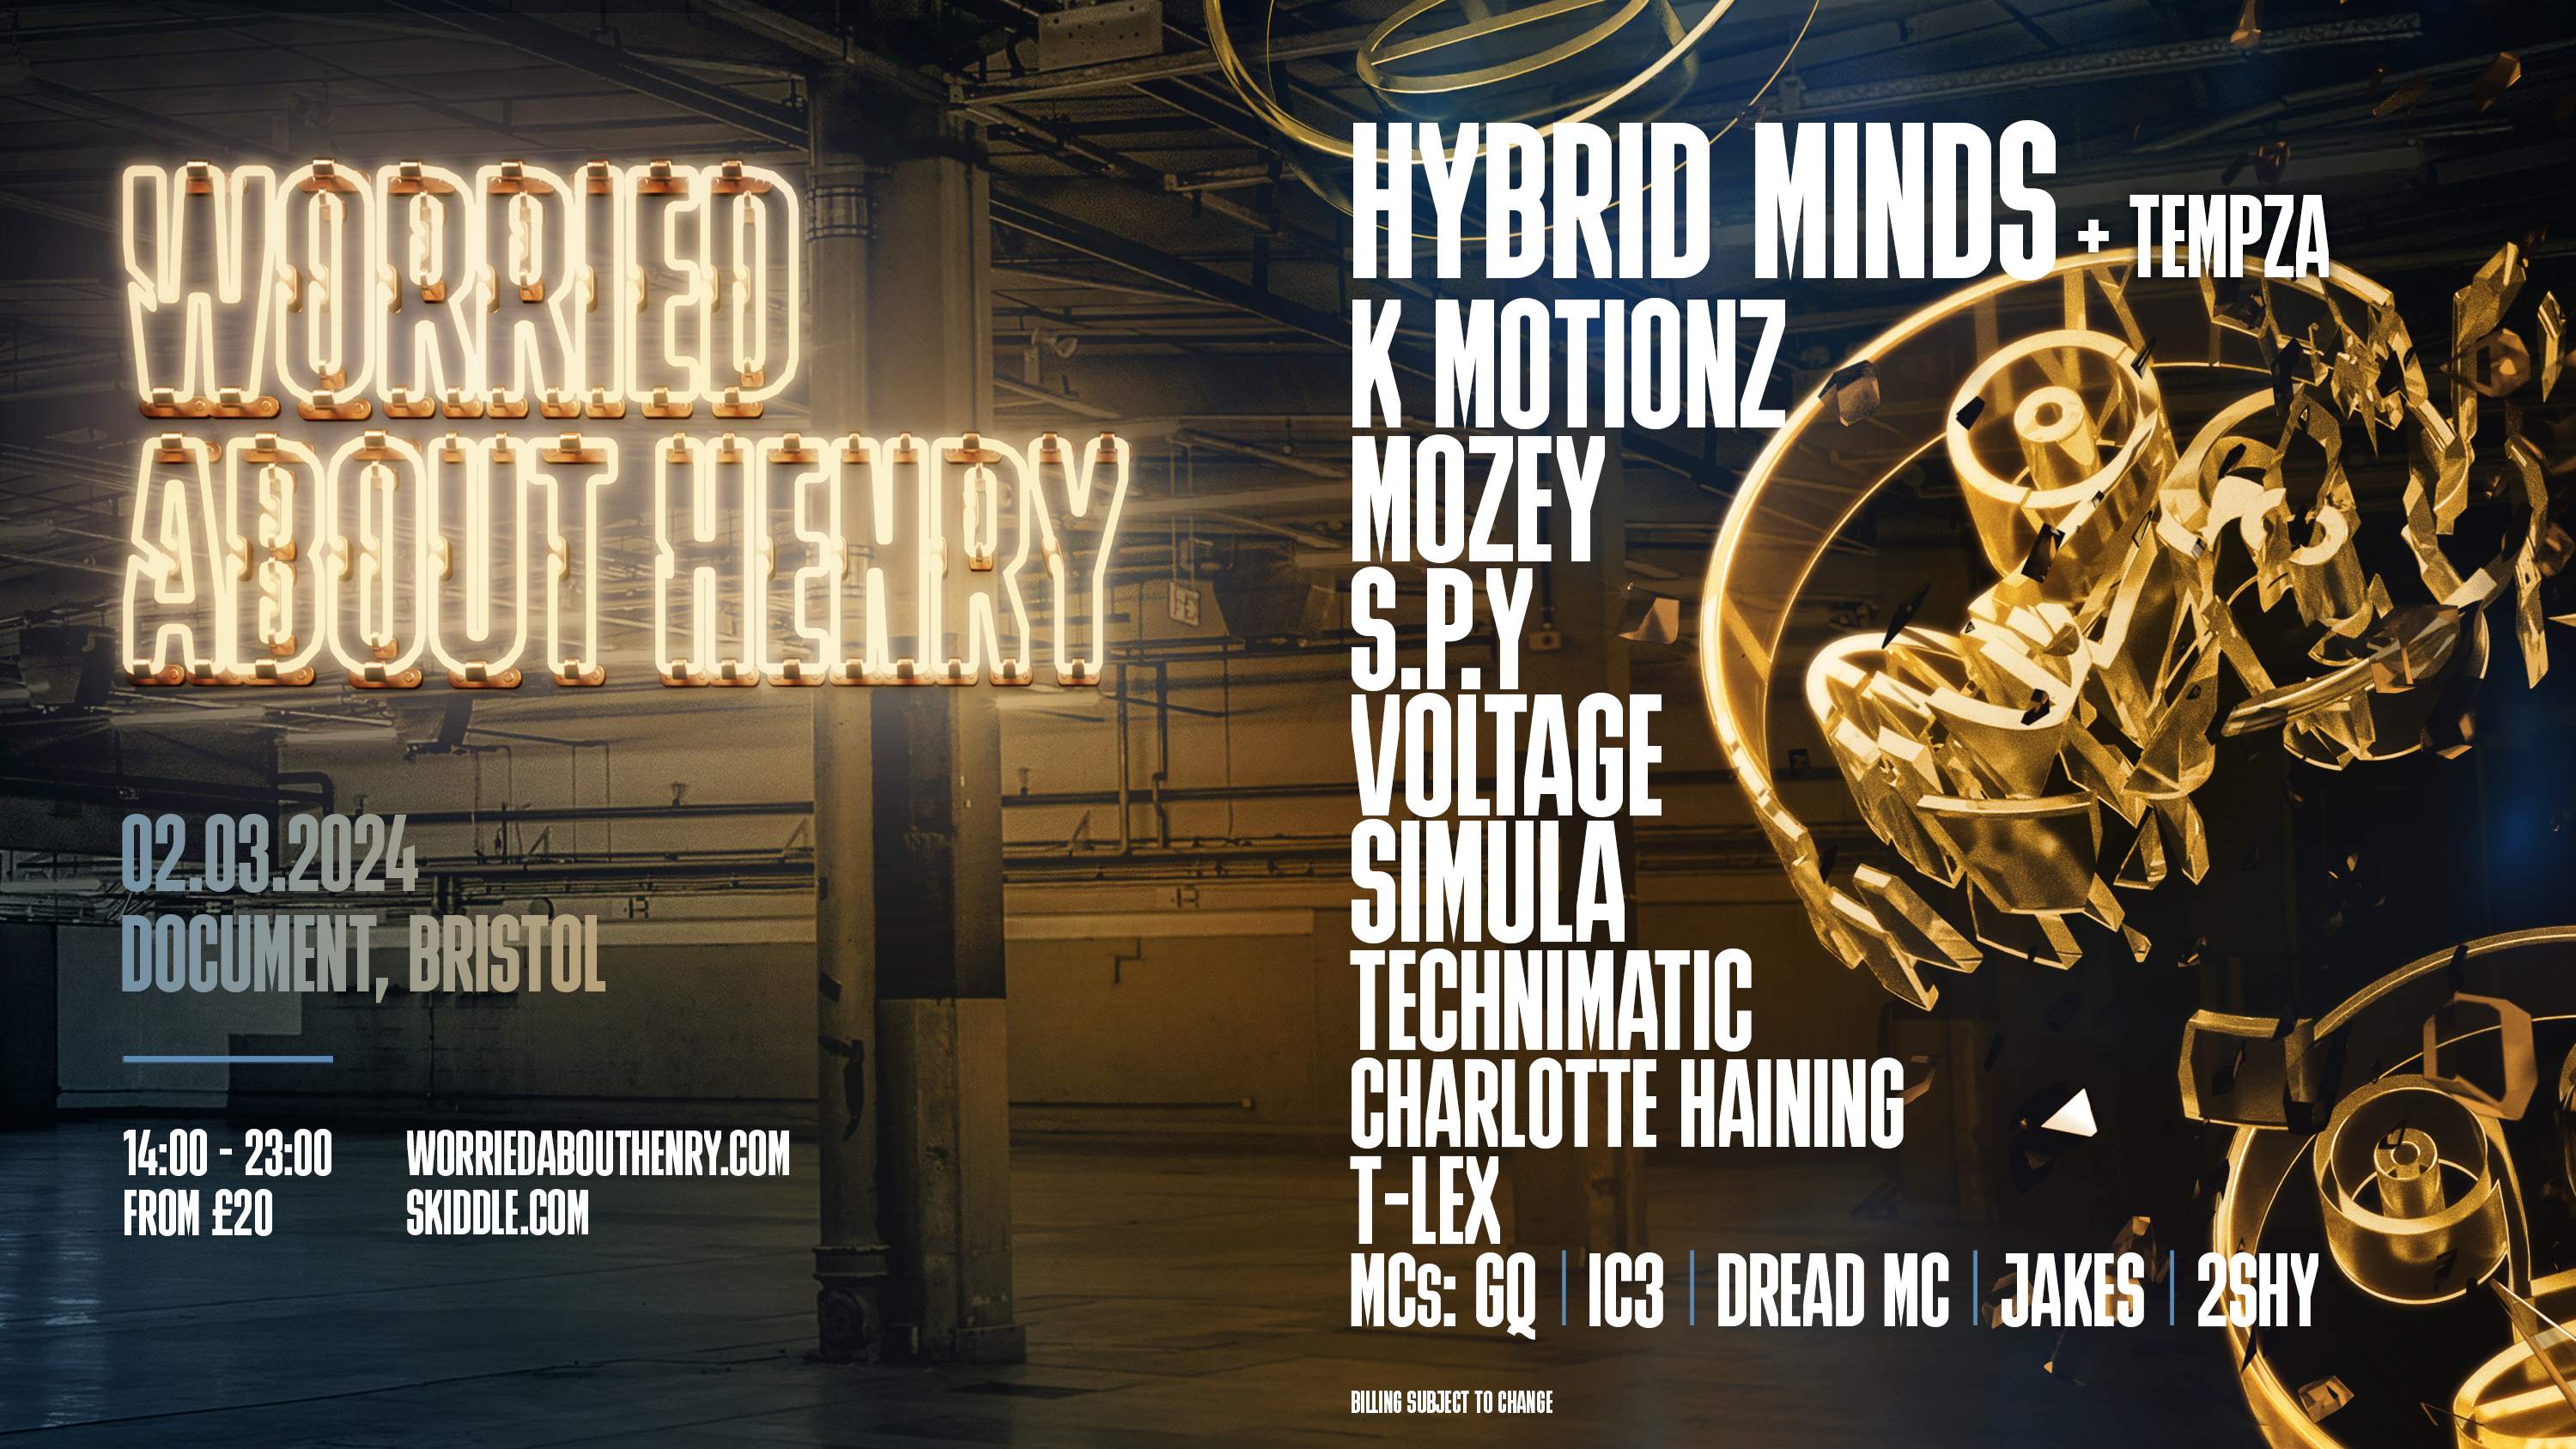 Worried About Henry x Document: Hybrid Mind + more - フライヤー表